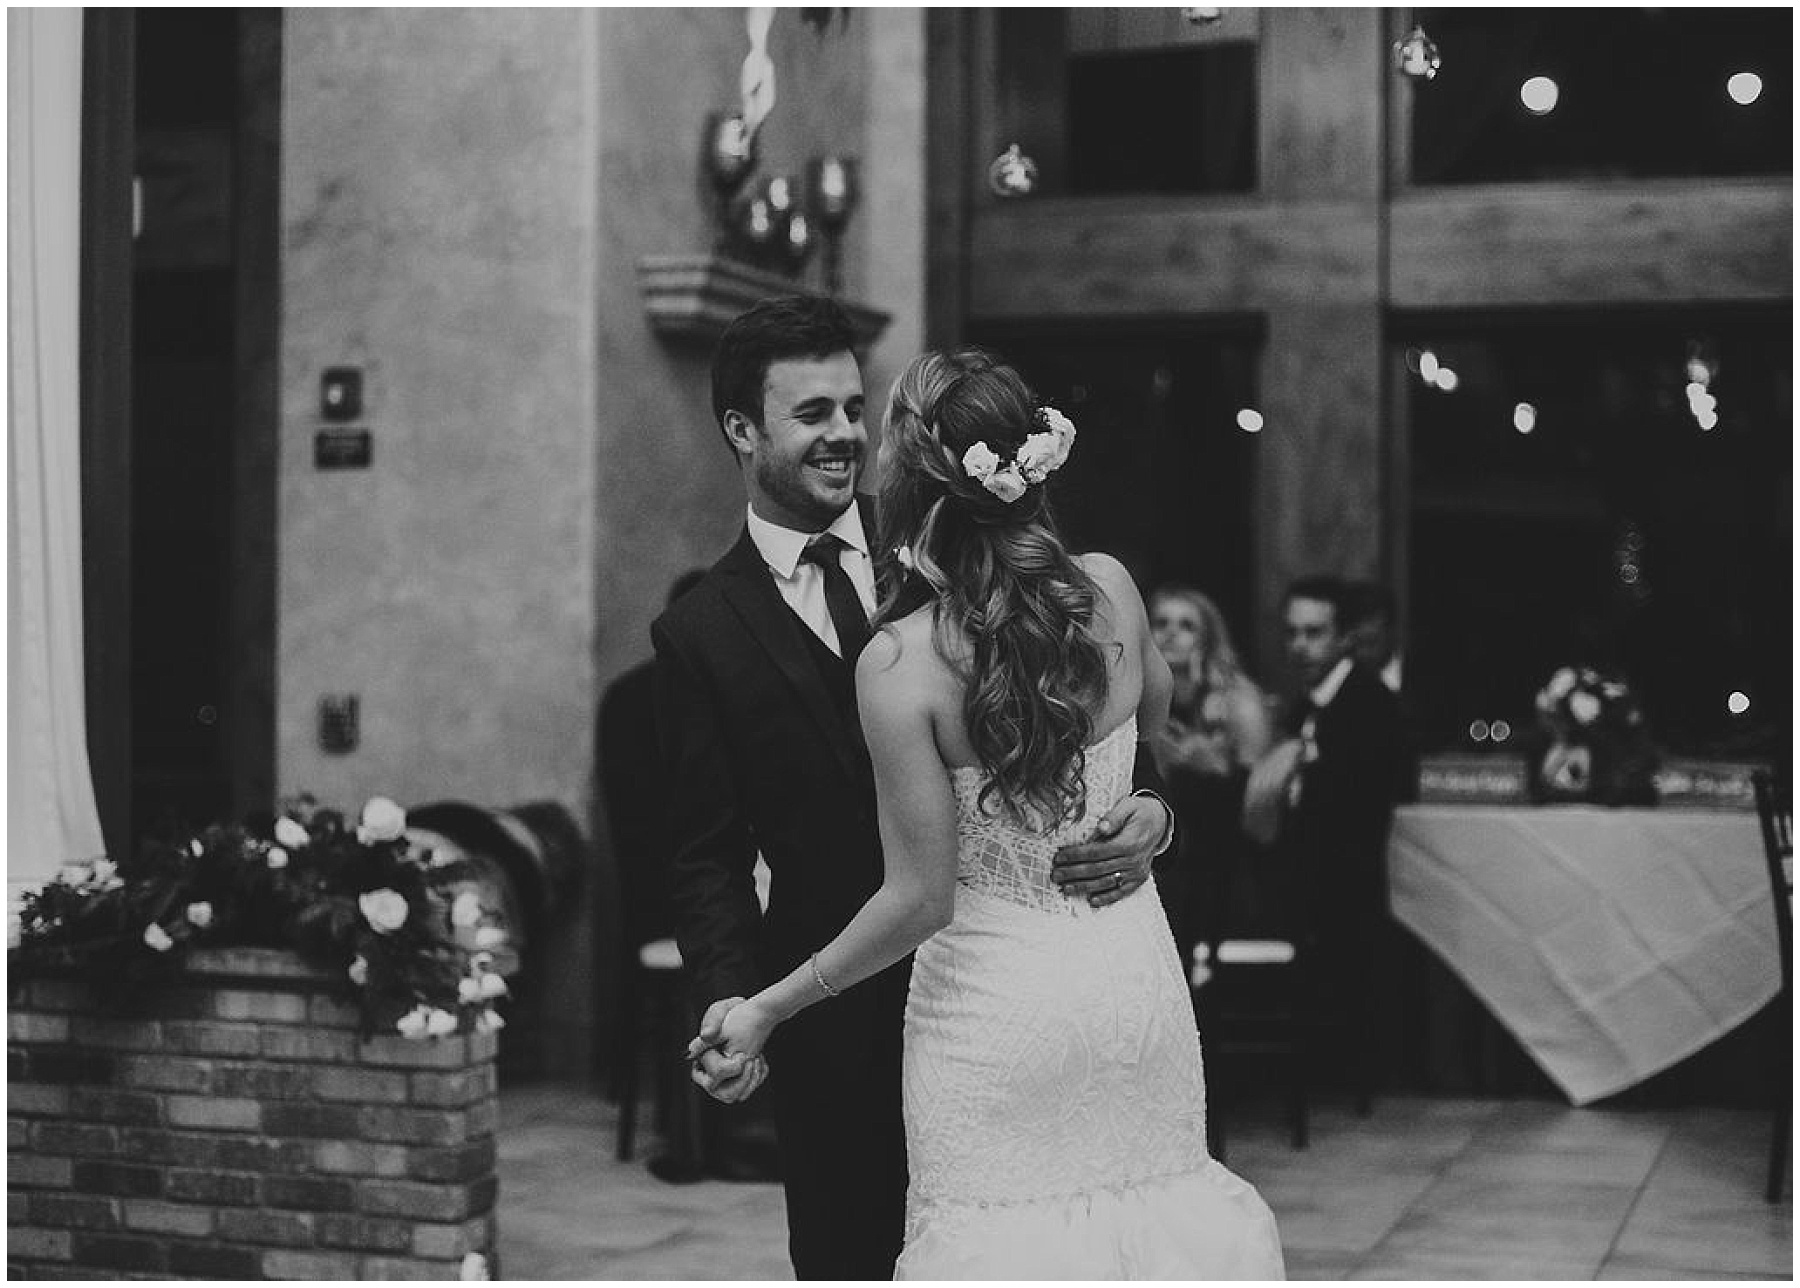 Katesalleyphotography-597_Haley and Dan get married in Estes Park.jpg